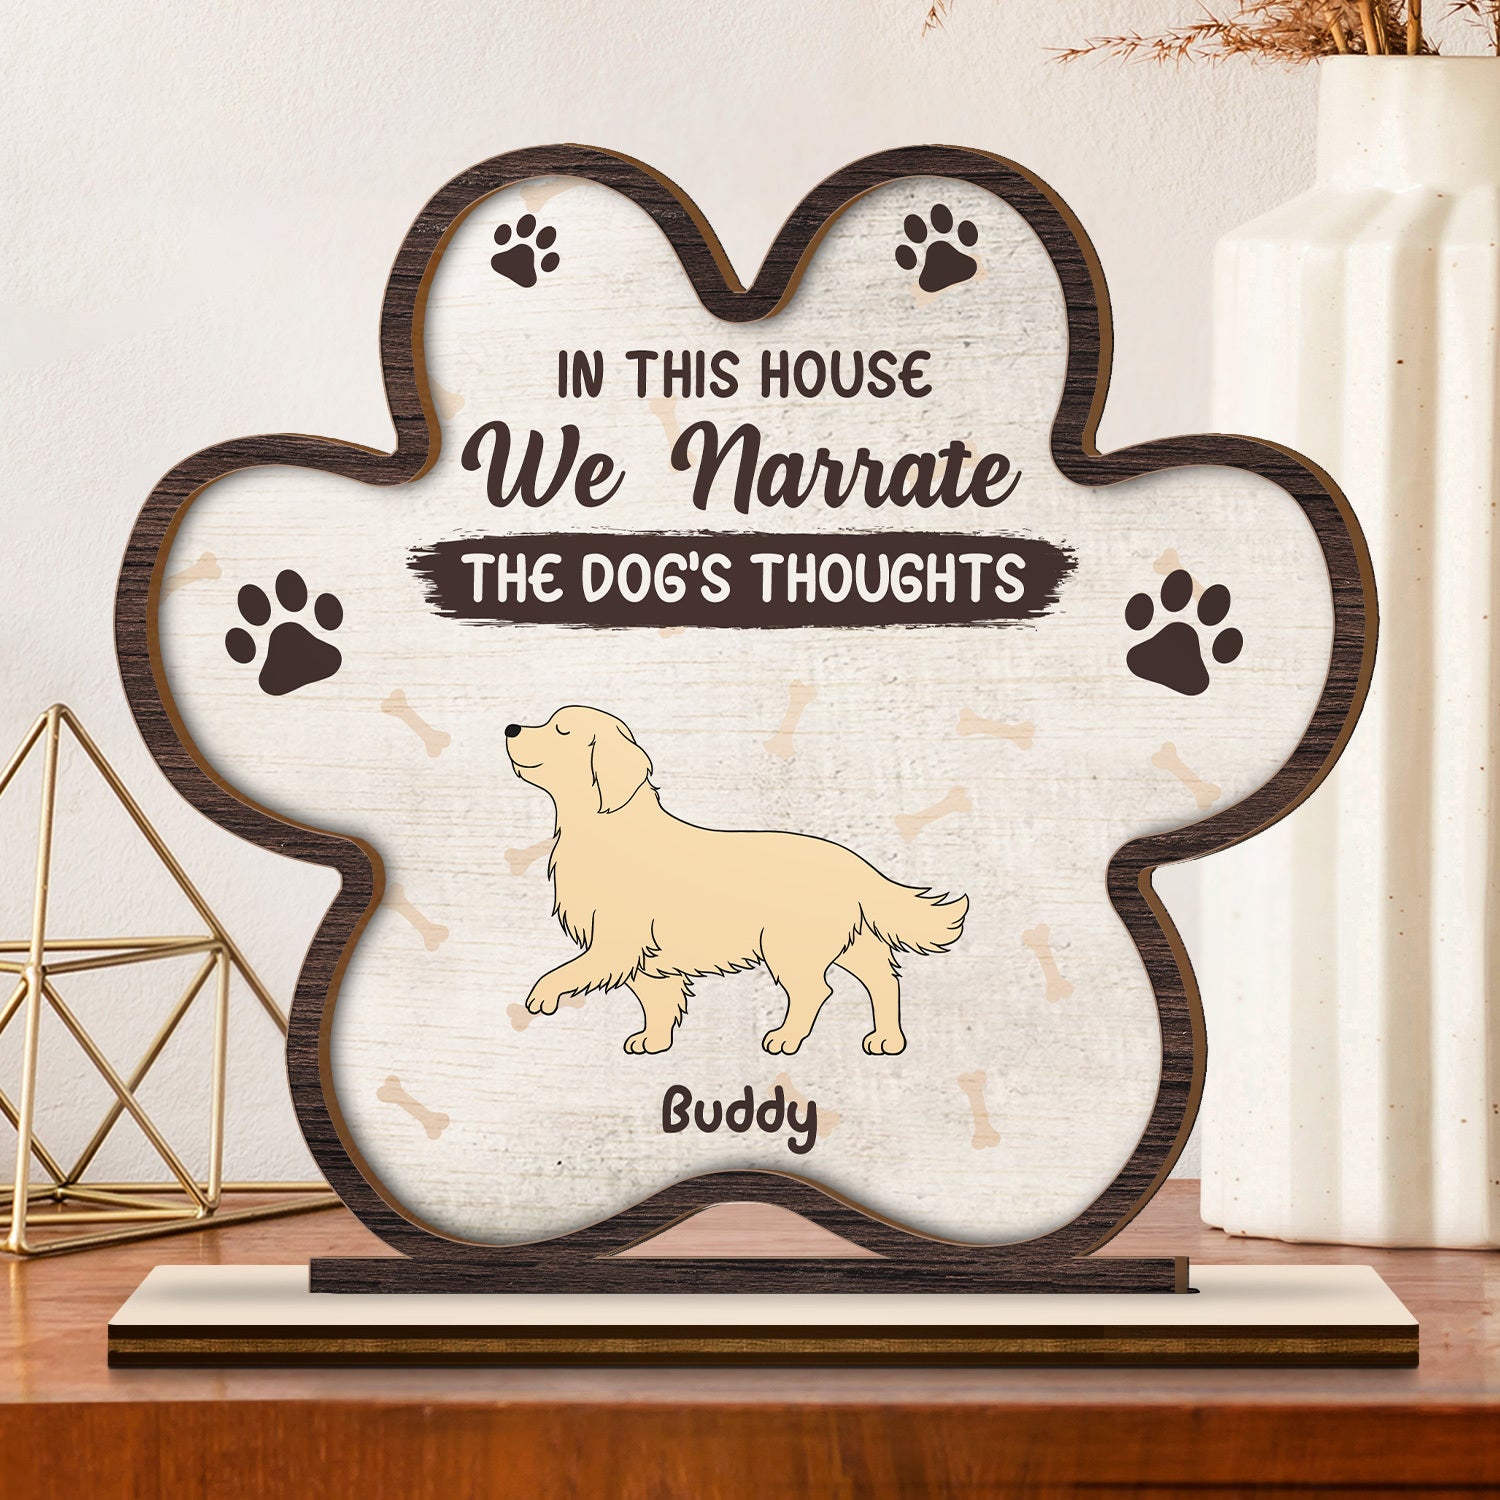 Narrate The Dog's Thought - Gift For Dog Lovers - Personalized Custom Shaped 2-Layered Wooden Plaque